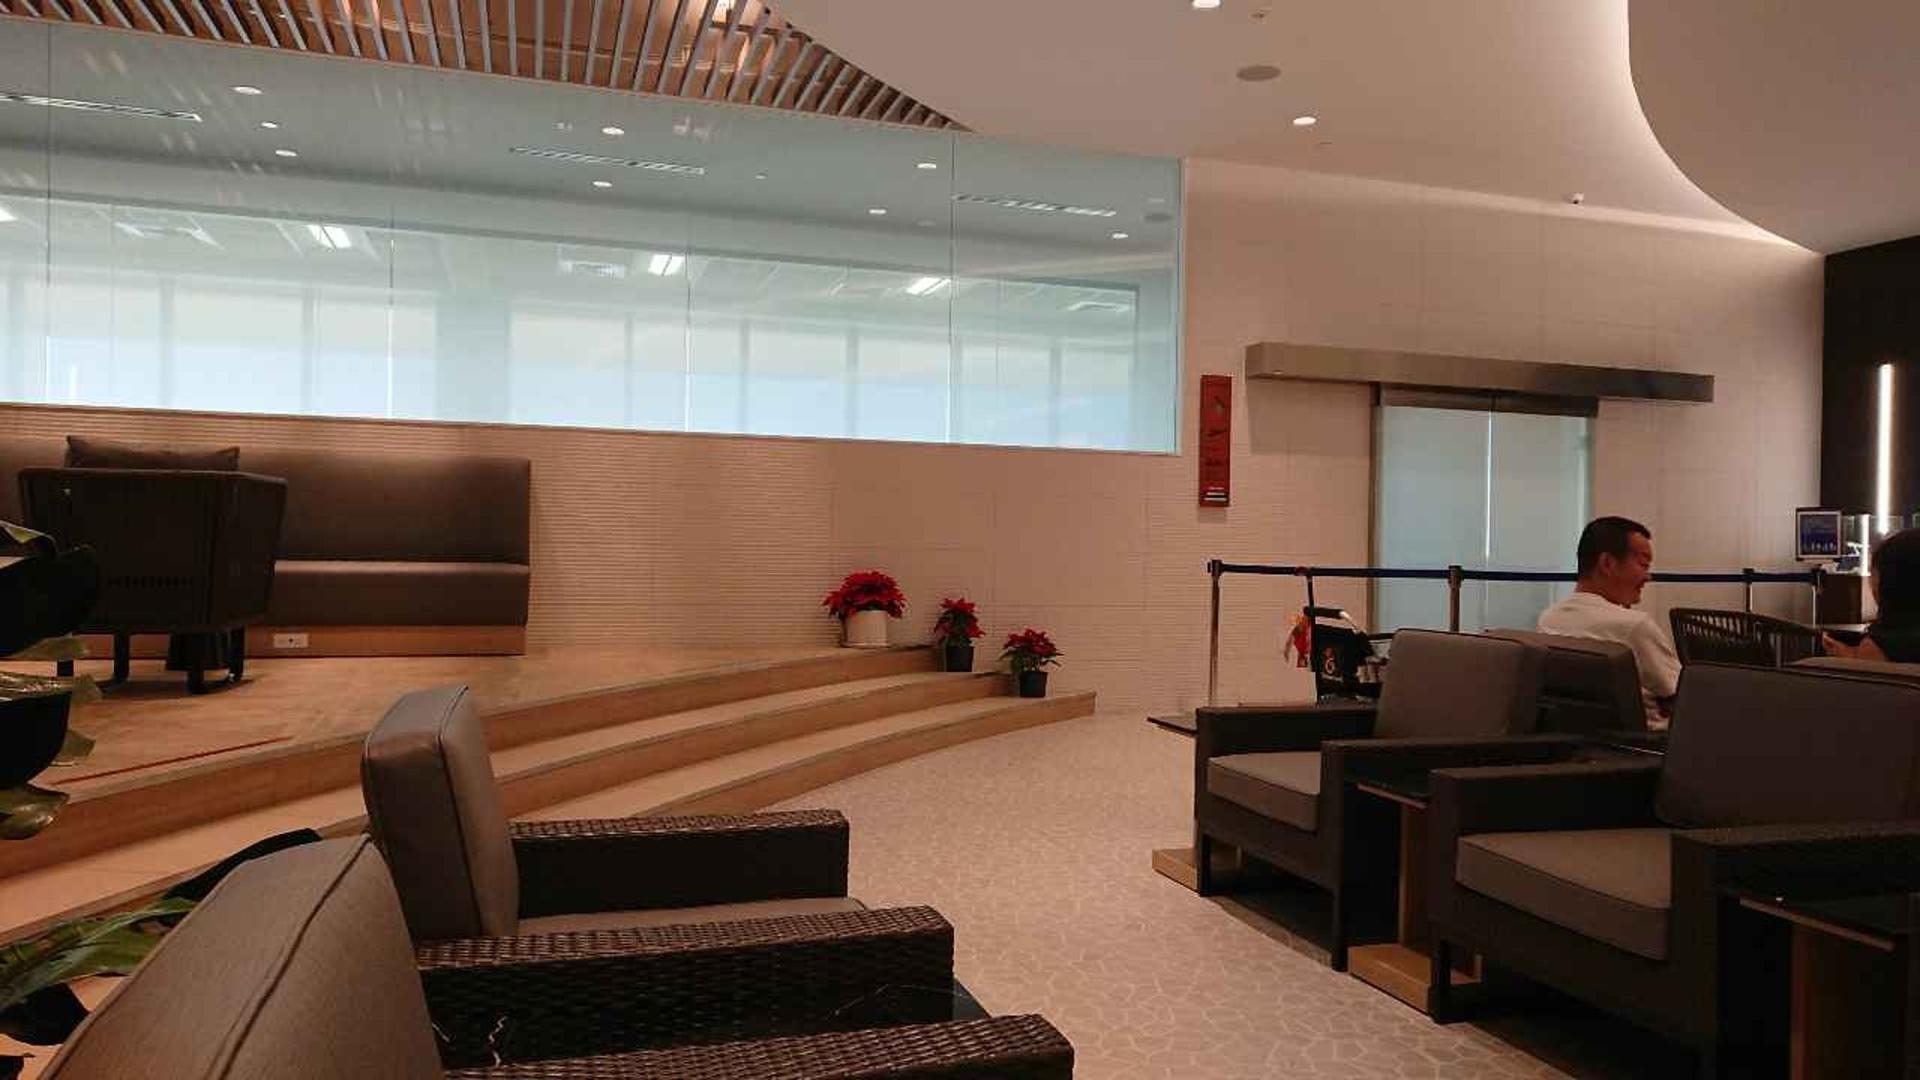 All Nippon Airways ANA Suite Lounge image 6 of 6